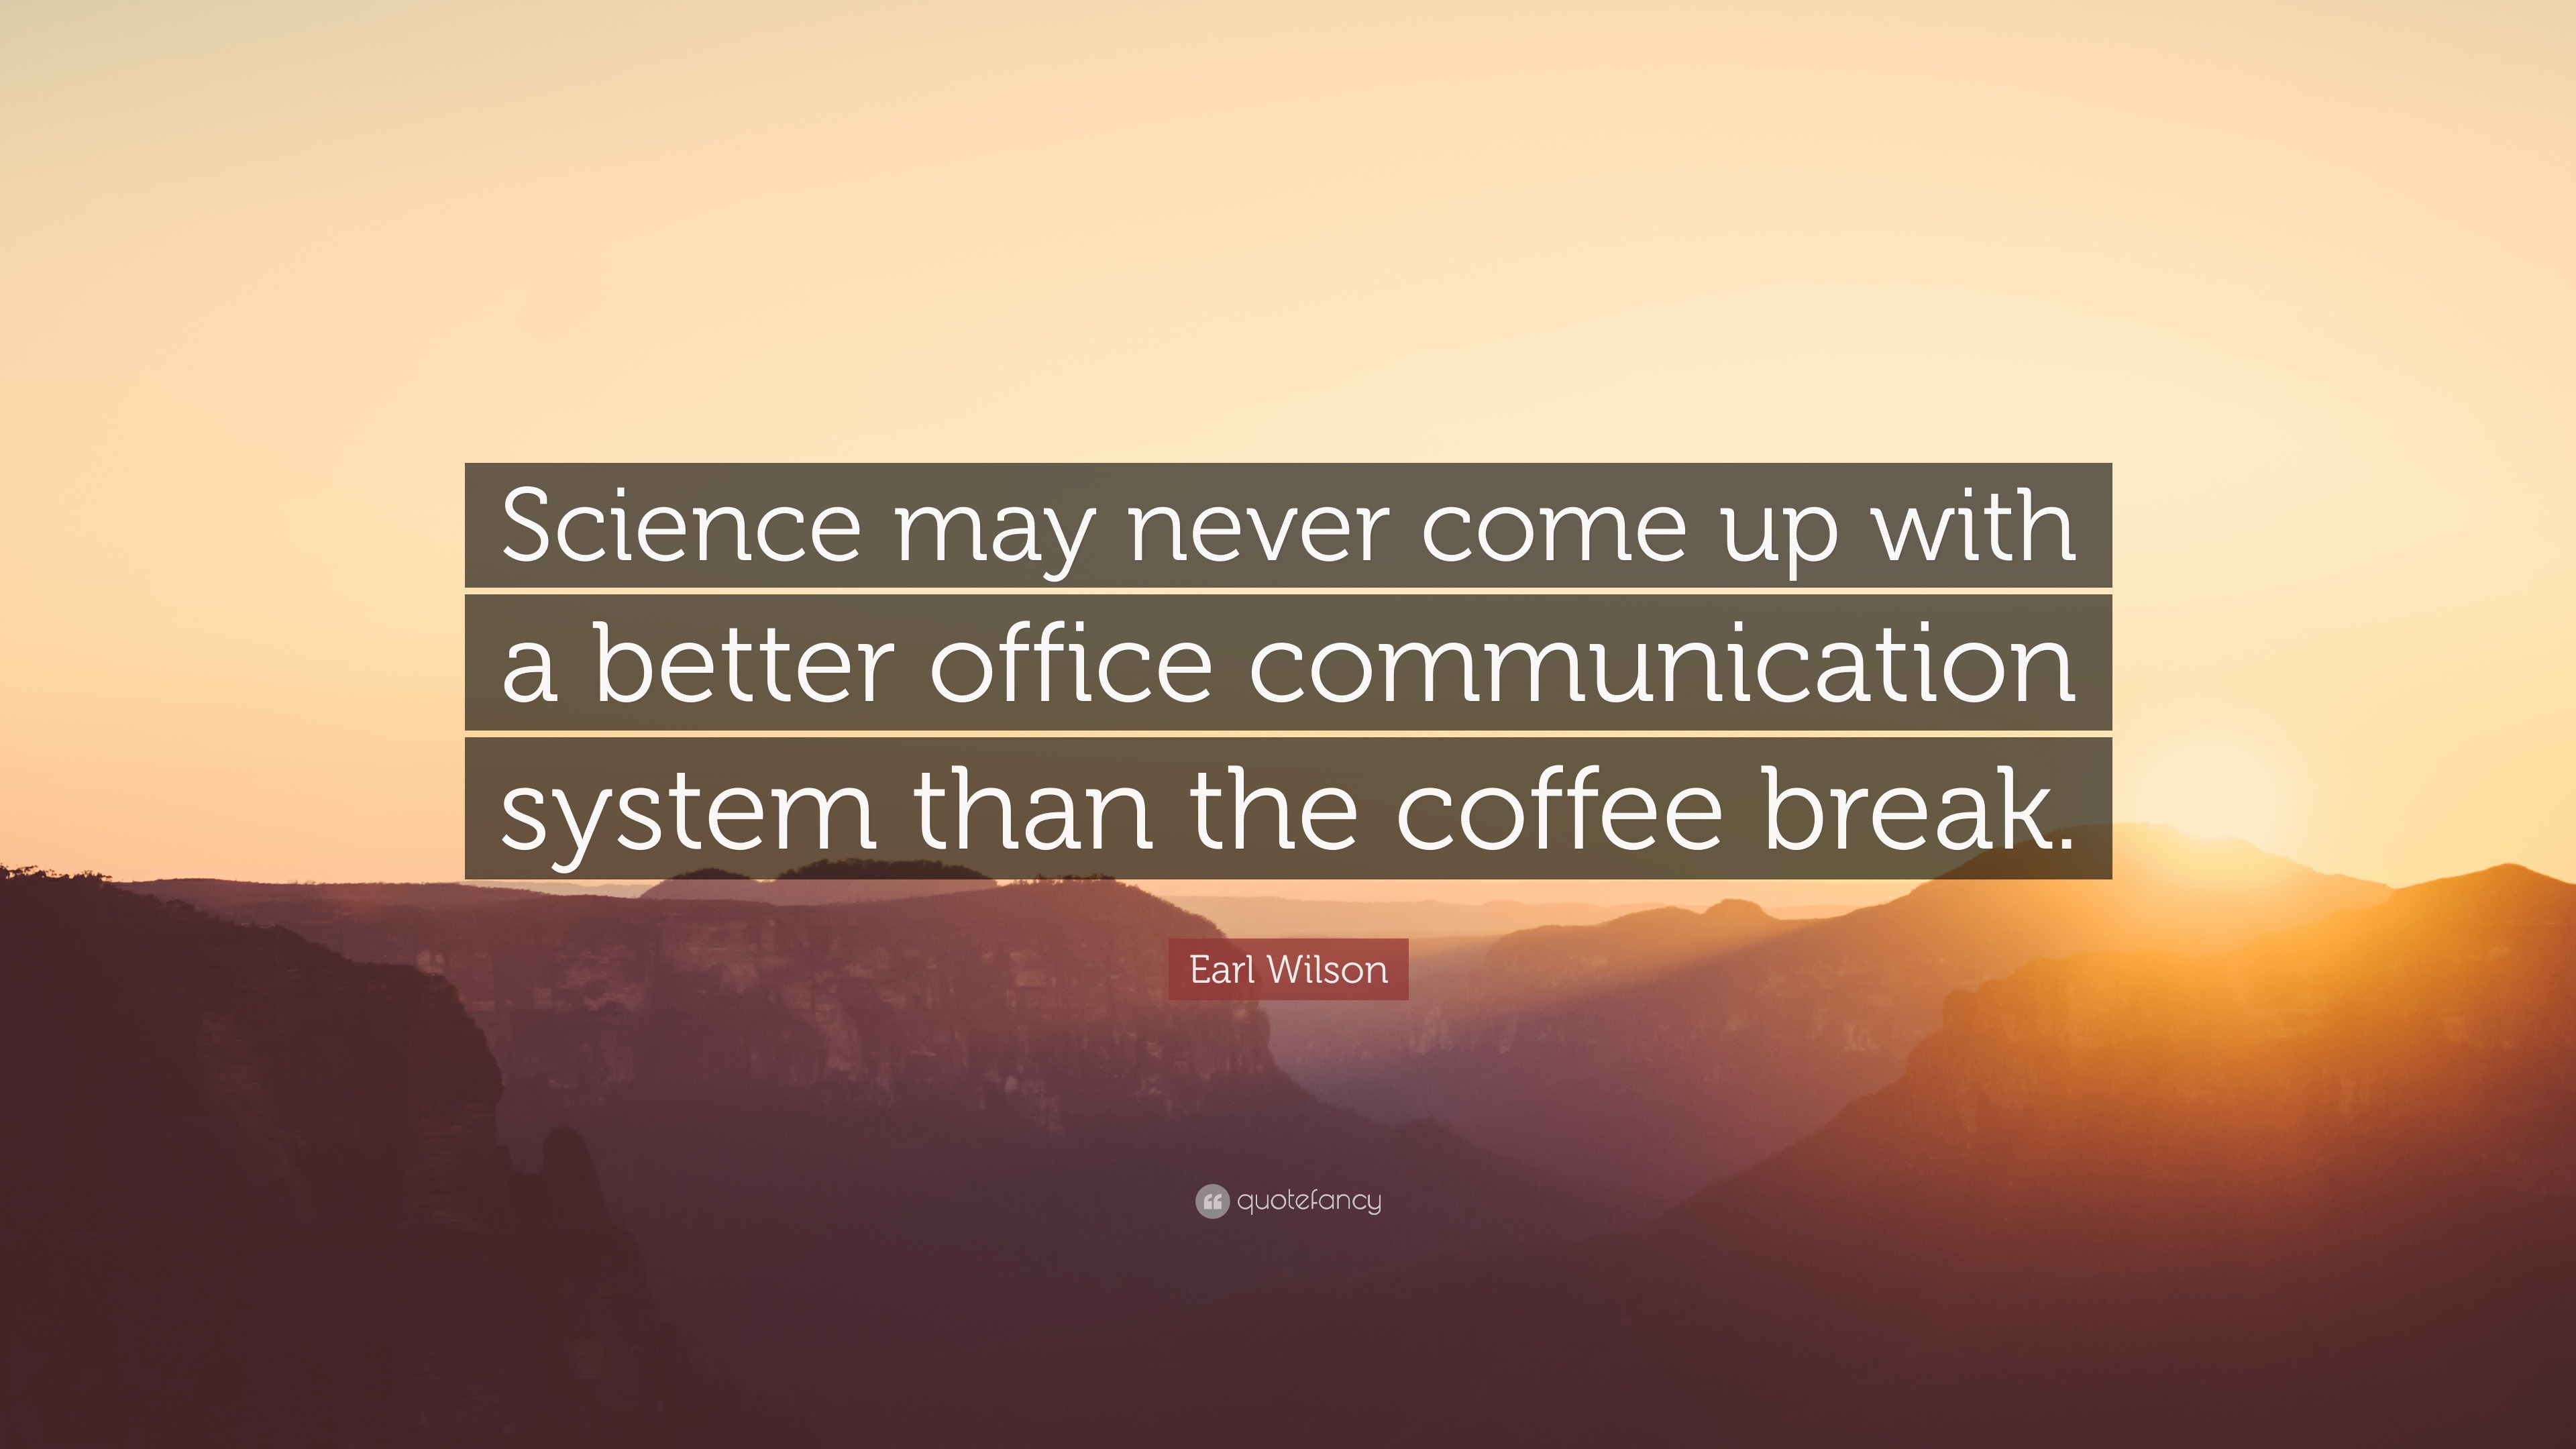 Earl Wilson Quote: “Science may never come up with a better office  communication system than the